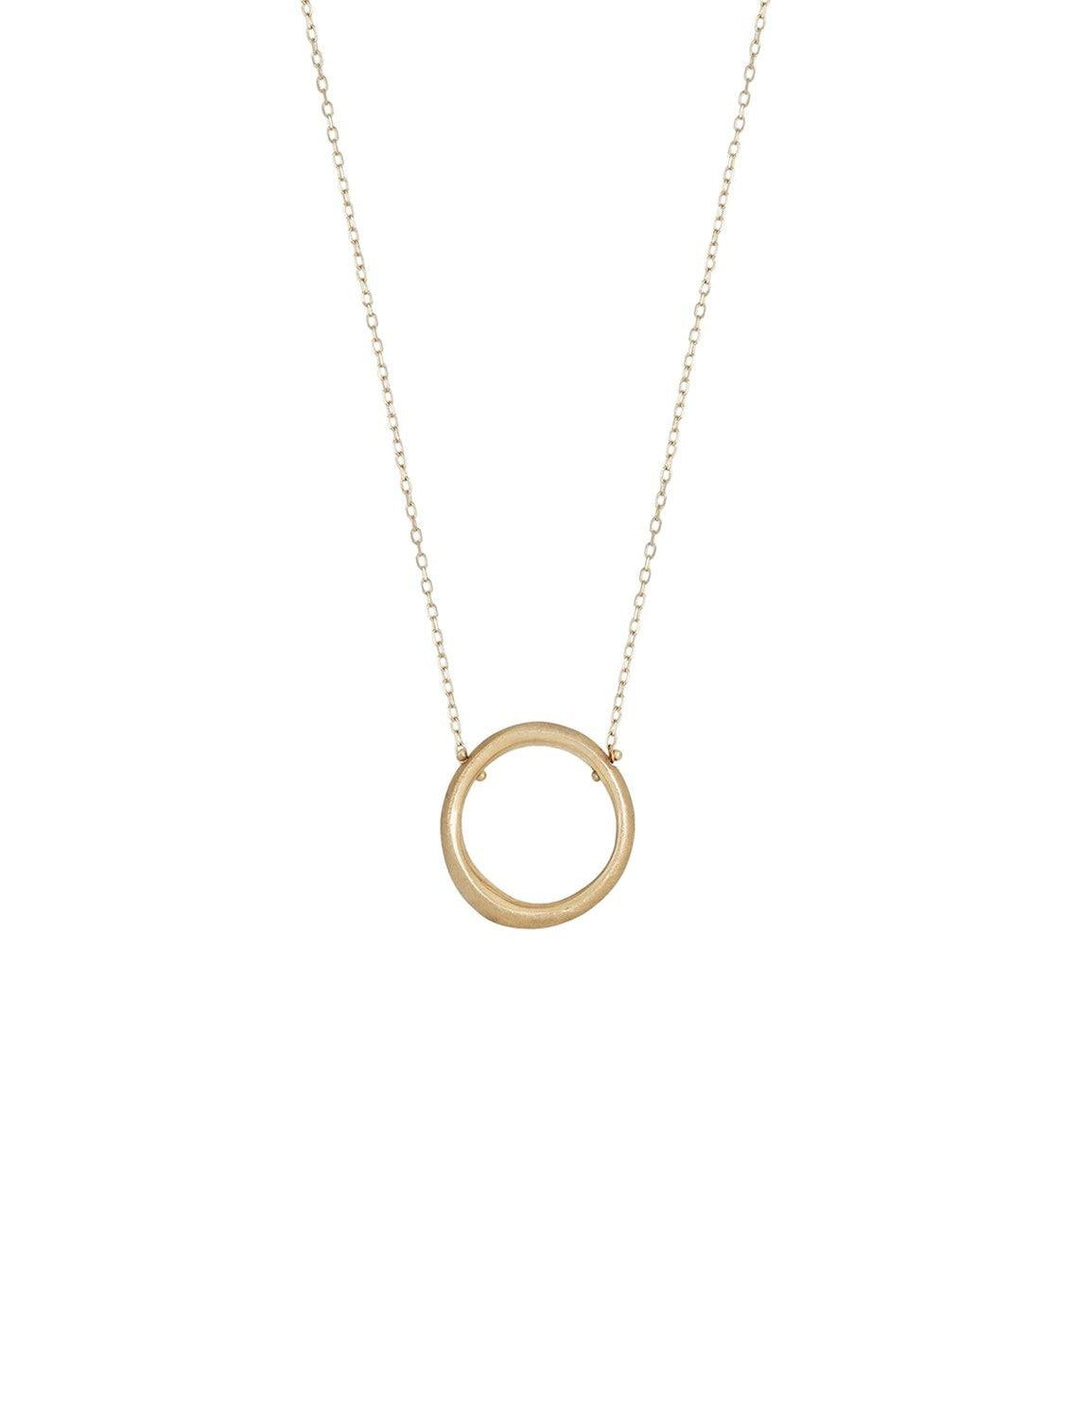 shaesby | petite celestial pendant in gold